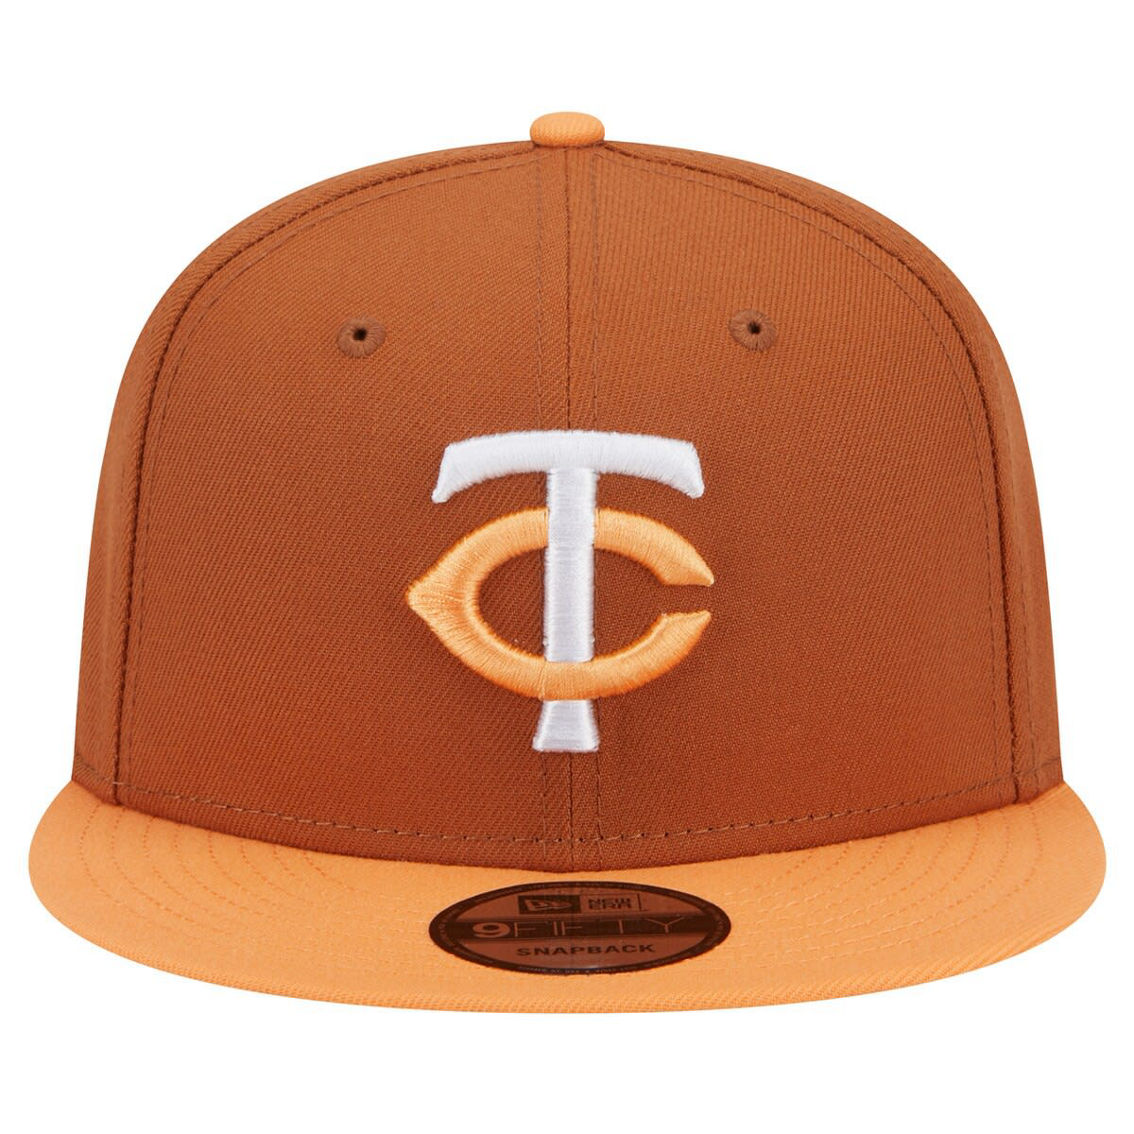 New Era Men's Brown Minnesota Twins Spring Color Two-Tone 9FIFTY Snapback Hat - Image 3 of 4